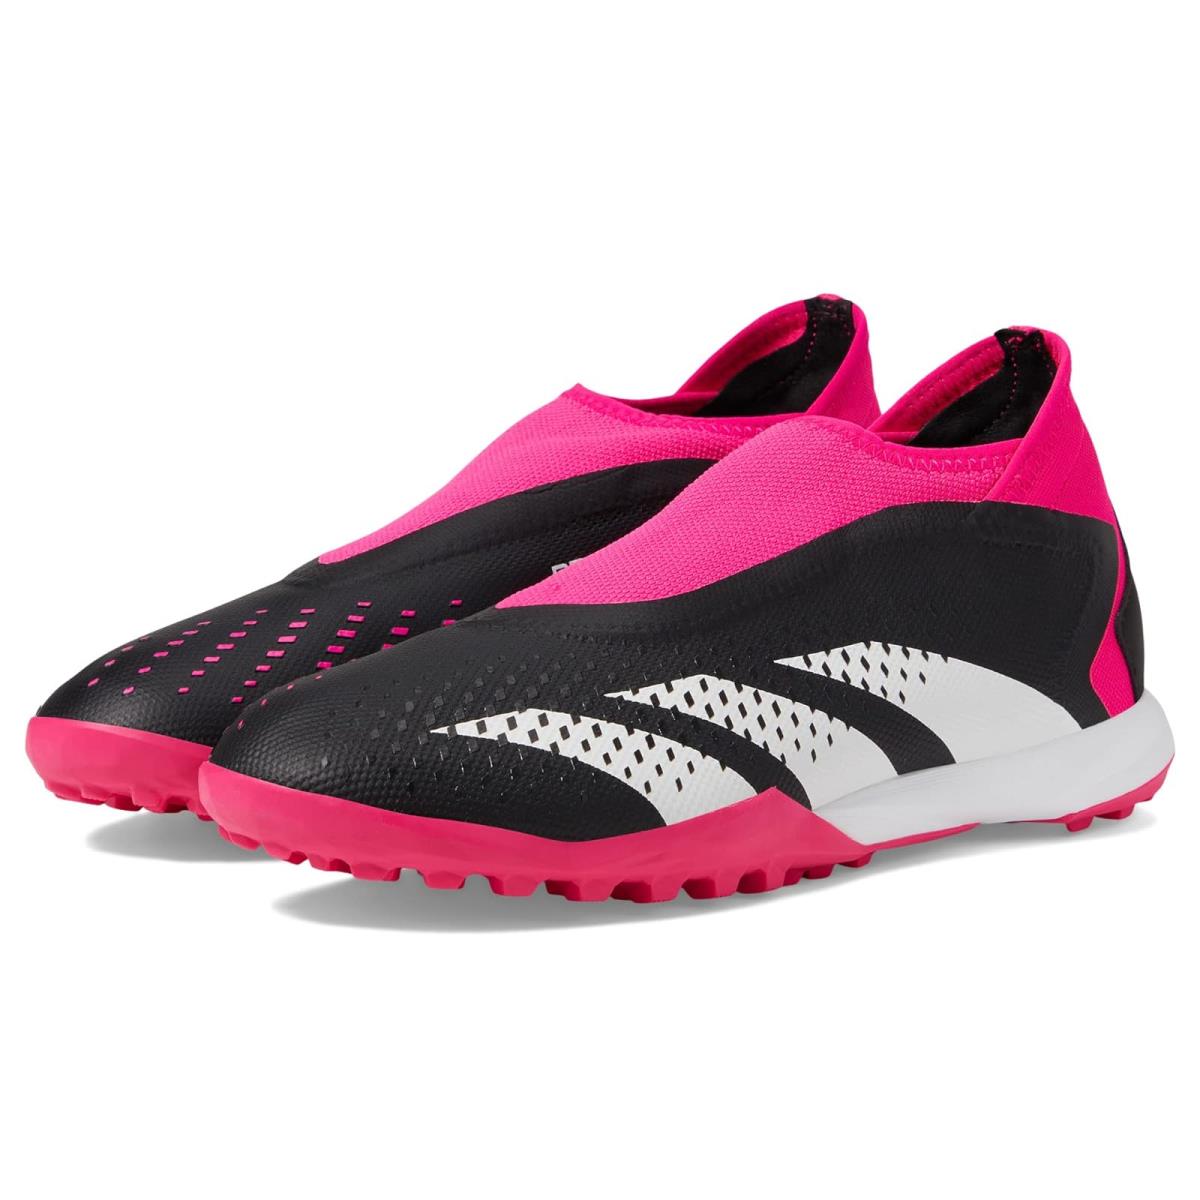 Unisex Sneakers Athletic Shoes Adidas Predator Accuracy.3 Turf Laceless Black/White/Team Shock Pink